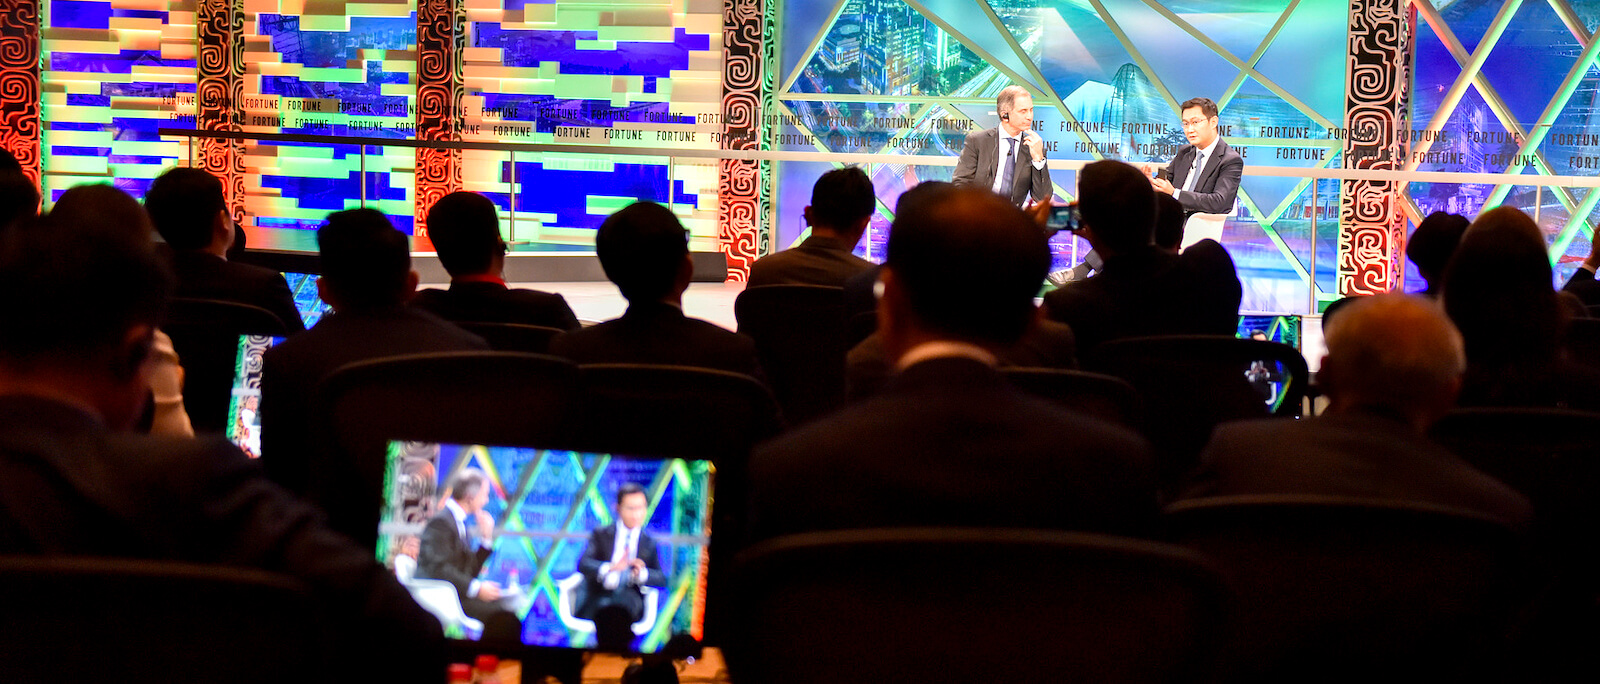 Pony Ma speaks at the Fortune Global Forum 2017 (Photo: Fortune Global Forum/Flickr)